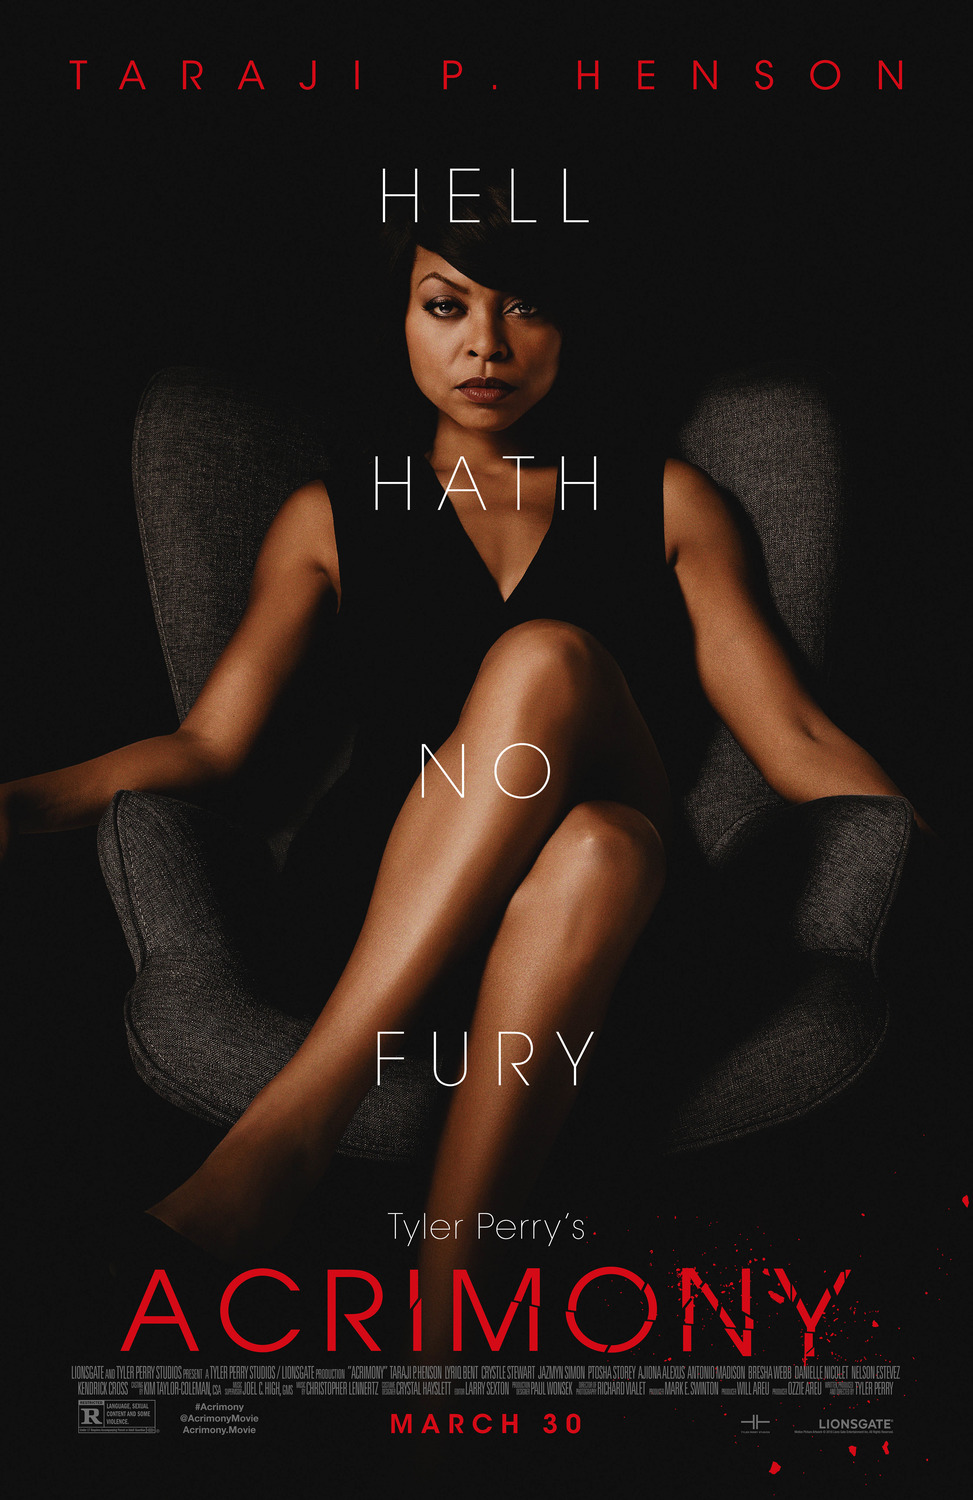 Extra Large Movie Poster Image for Acrimony (#4 of 4)